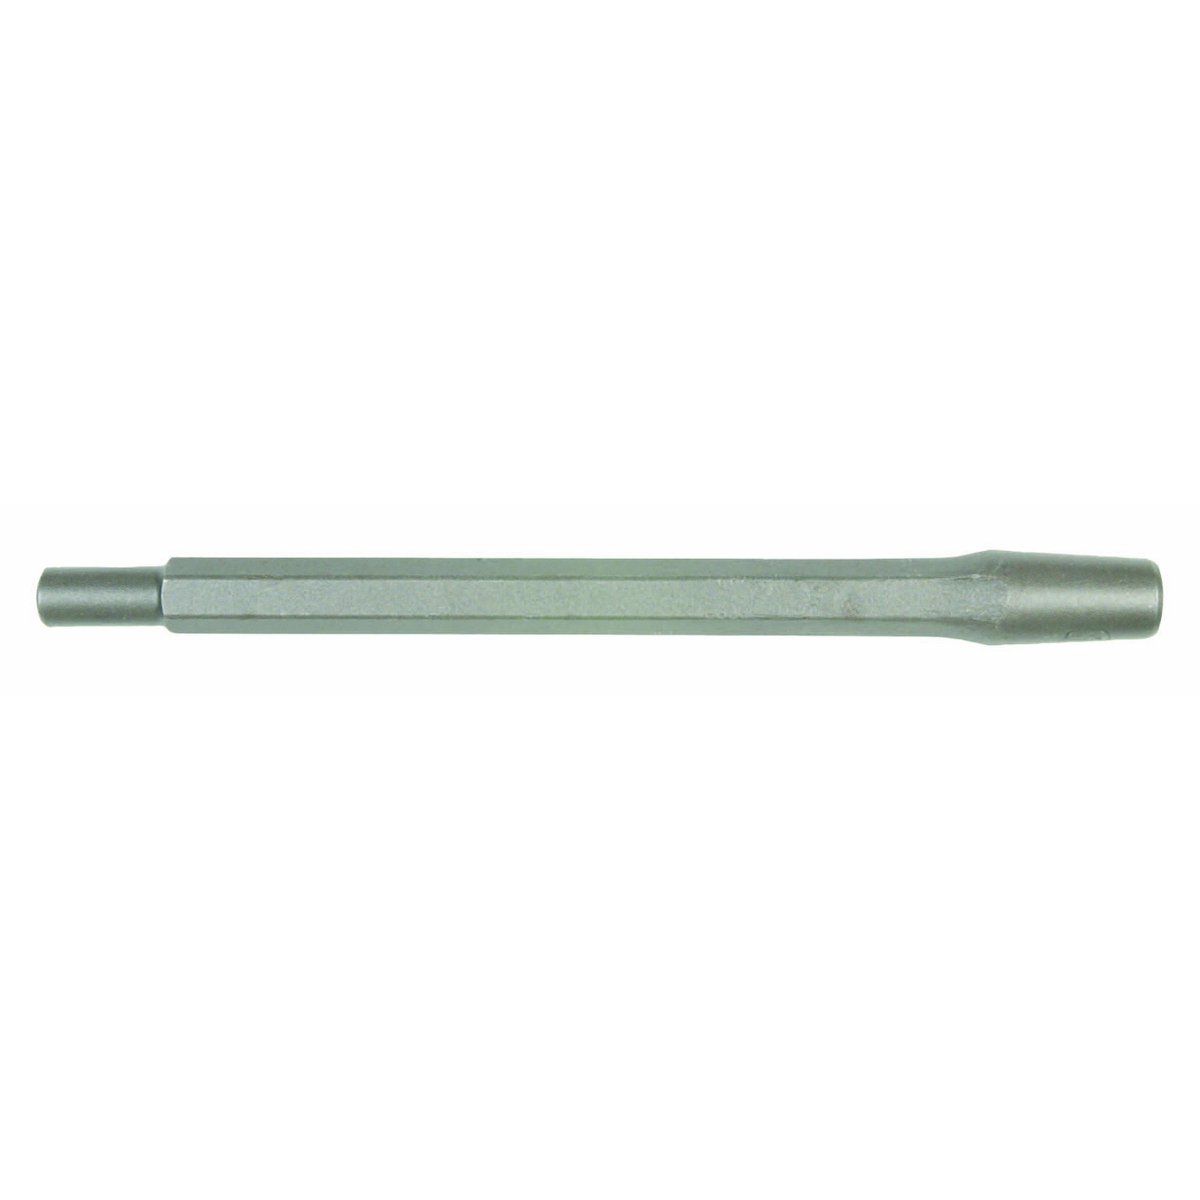 751546 SHANK FOR TAMPING PAD/BUSH PLATE 400MM